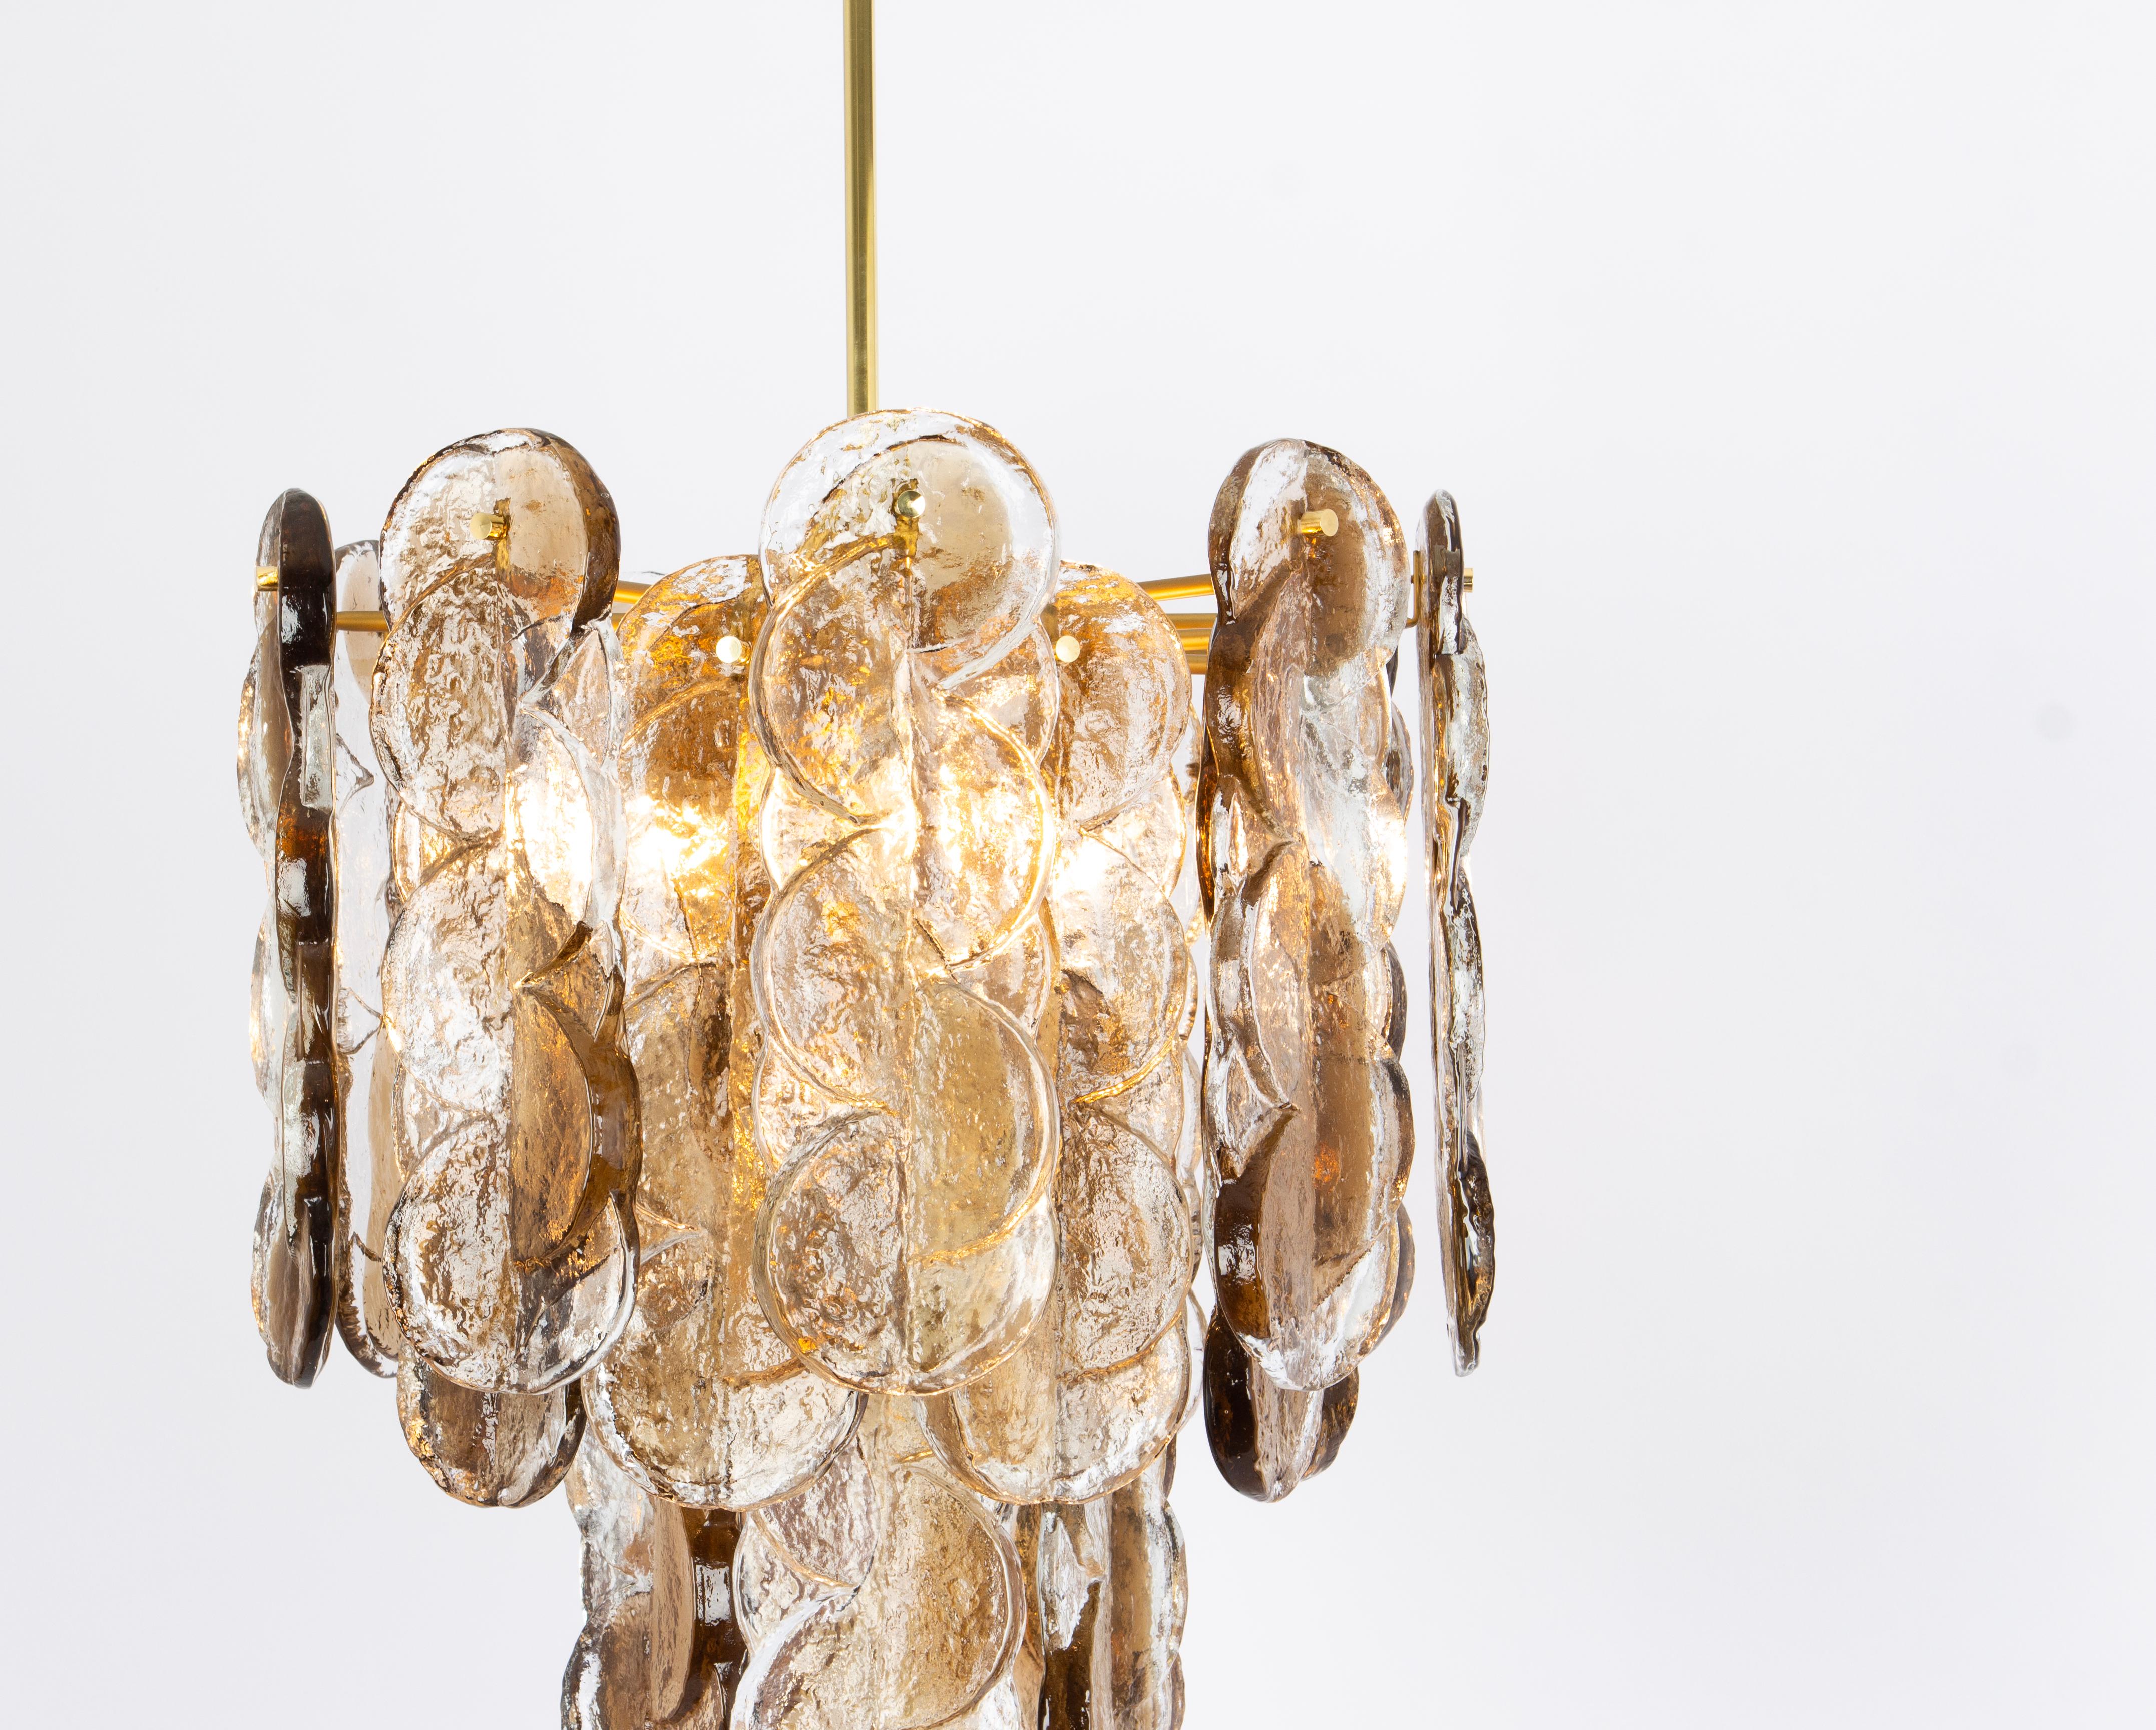 Wonderful Murano glass chandelier by Kalmar, 1970s
Smoked swirl ice glass, clear twisted crystal glass panels with a light goldish amber colored stripe in it.

It needs 6 x E27 standard bulbs.
Light bulbs are not included. It is possible to install